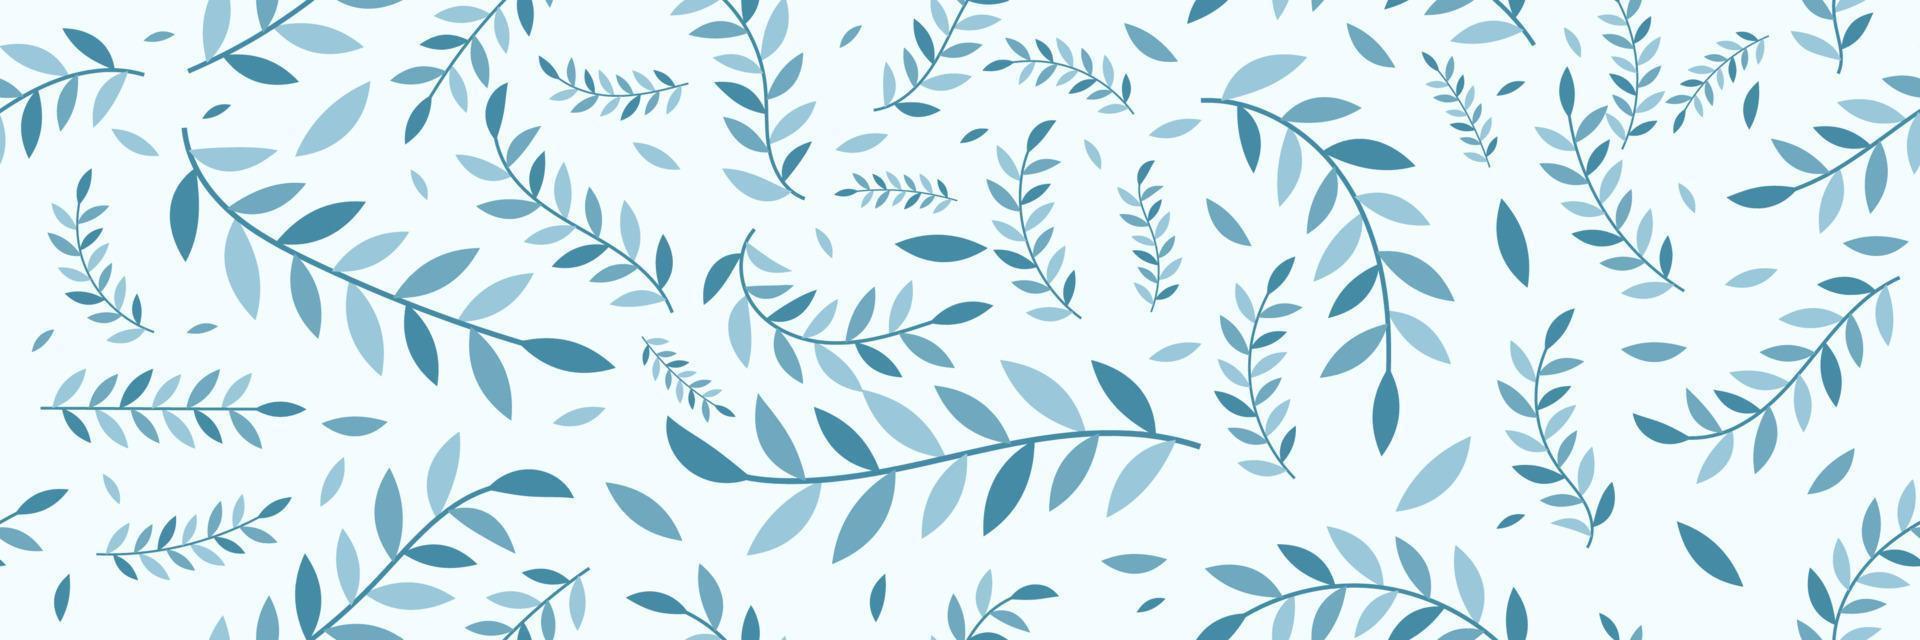 Winter seamless pattern with leaves. Hand drawn floral seamless vector pattern. Floral fantasy motif. Vector illustration